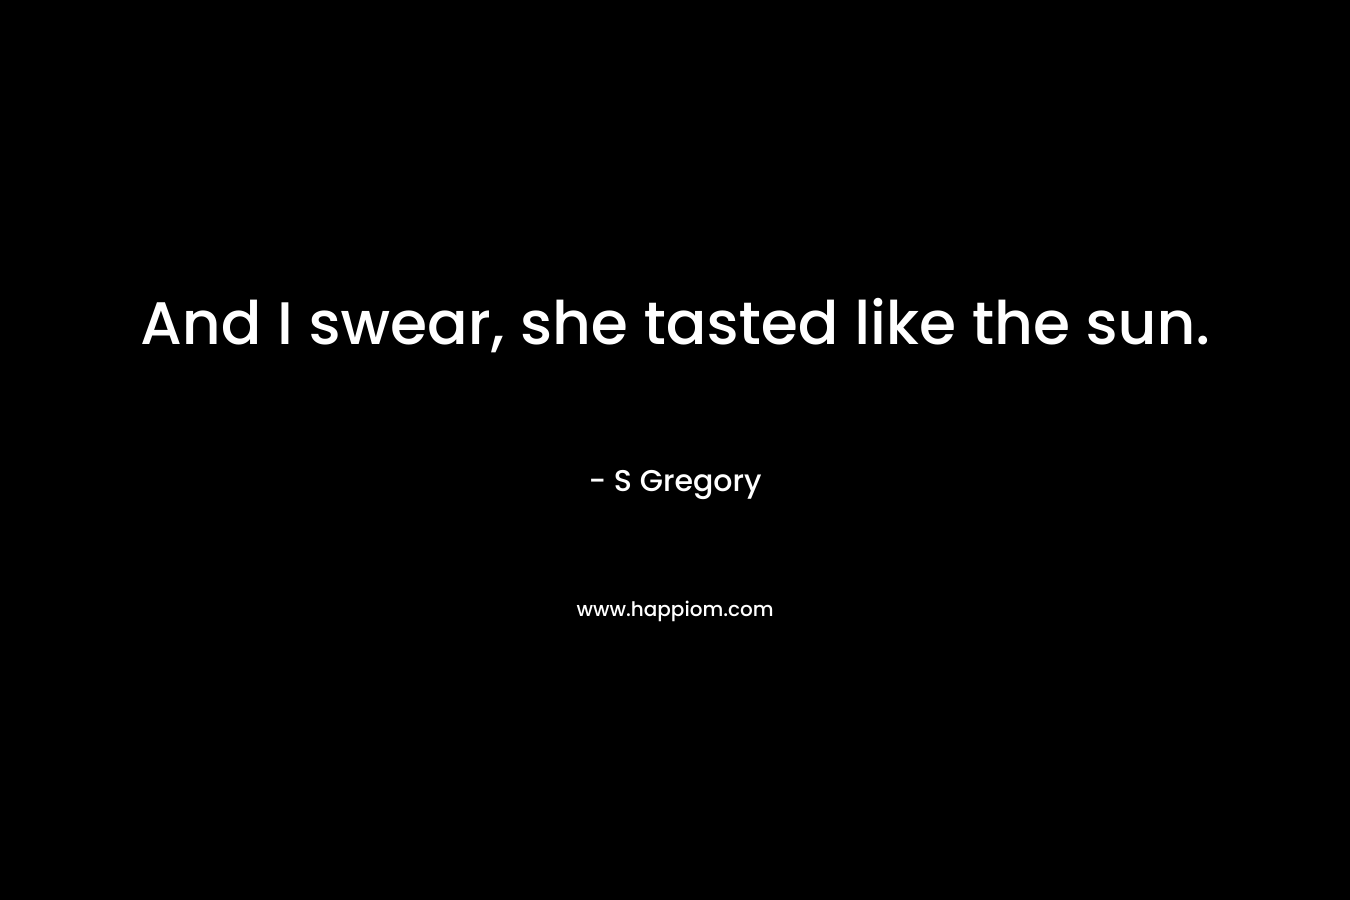 And I swear, she tasted like the sun. – S Gregory